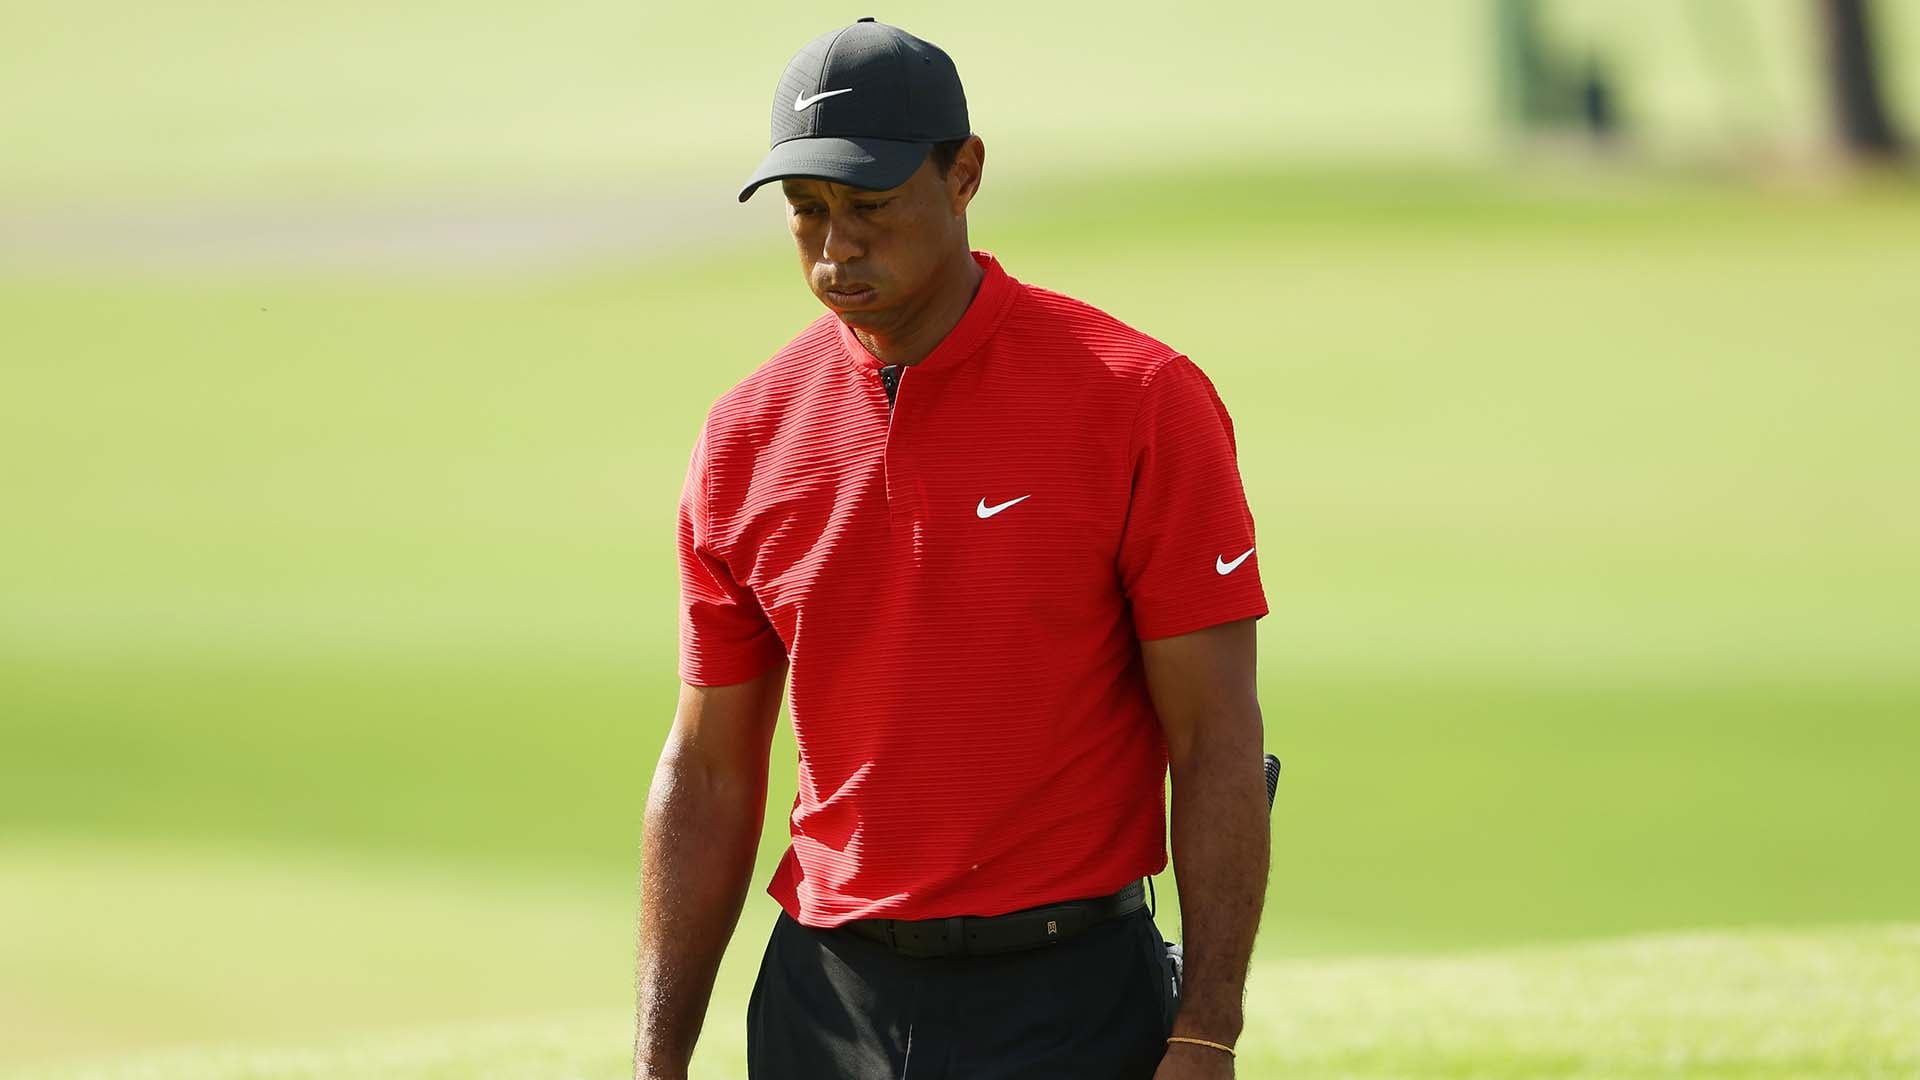 Tiger Woods announces another back surgery, to miss Farmers and Genesis 4